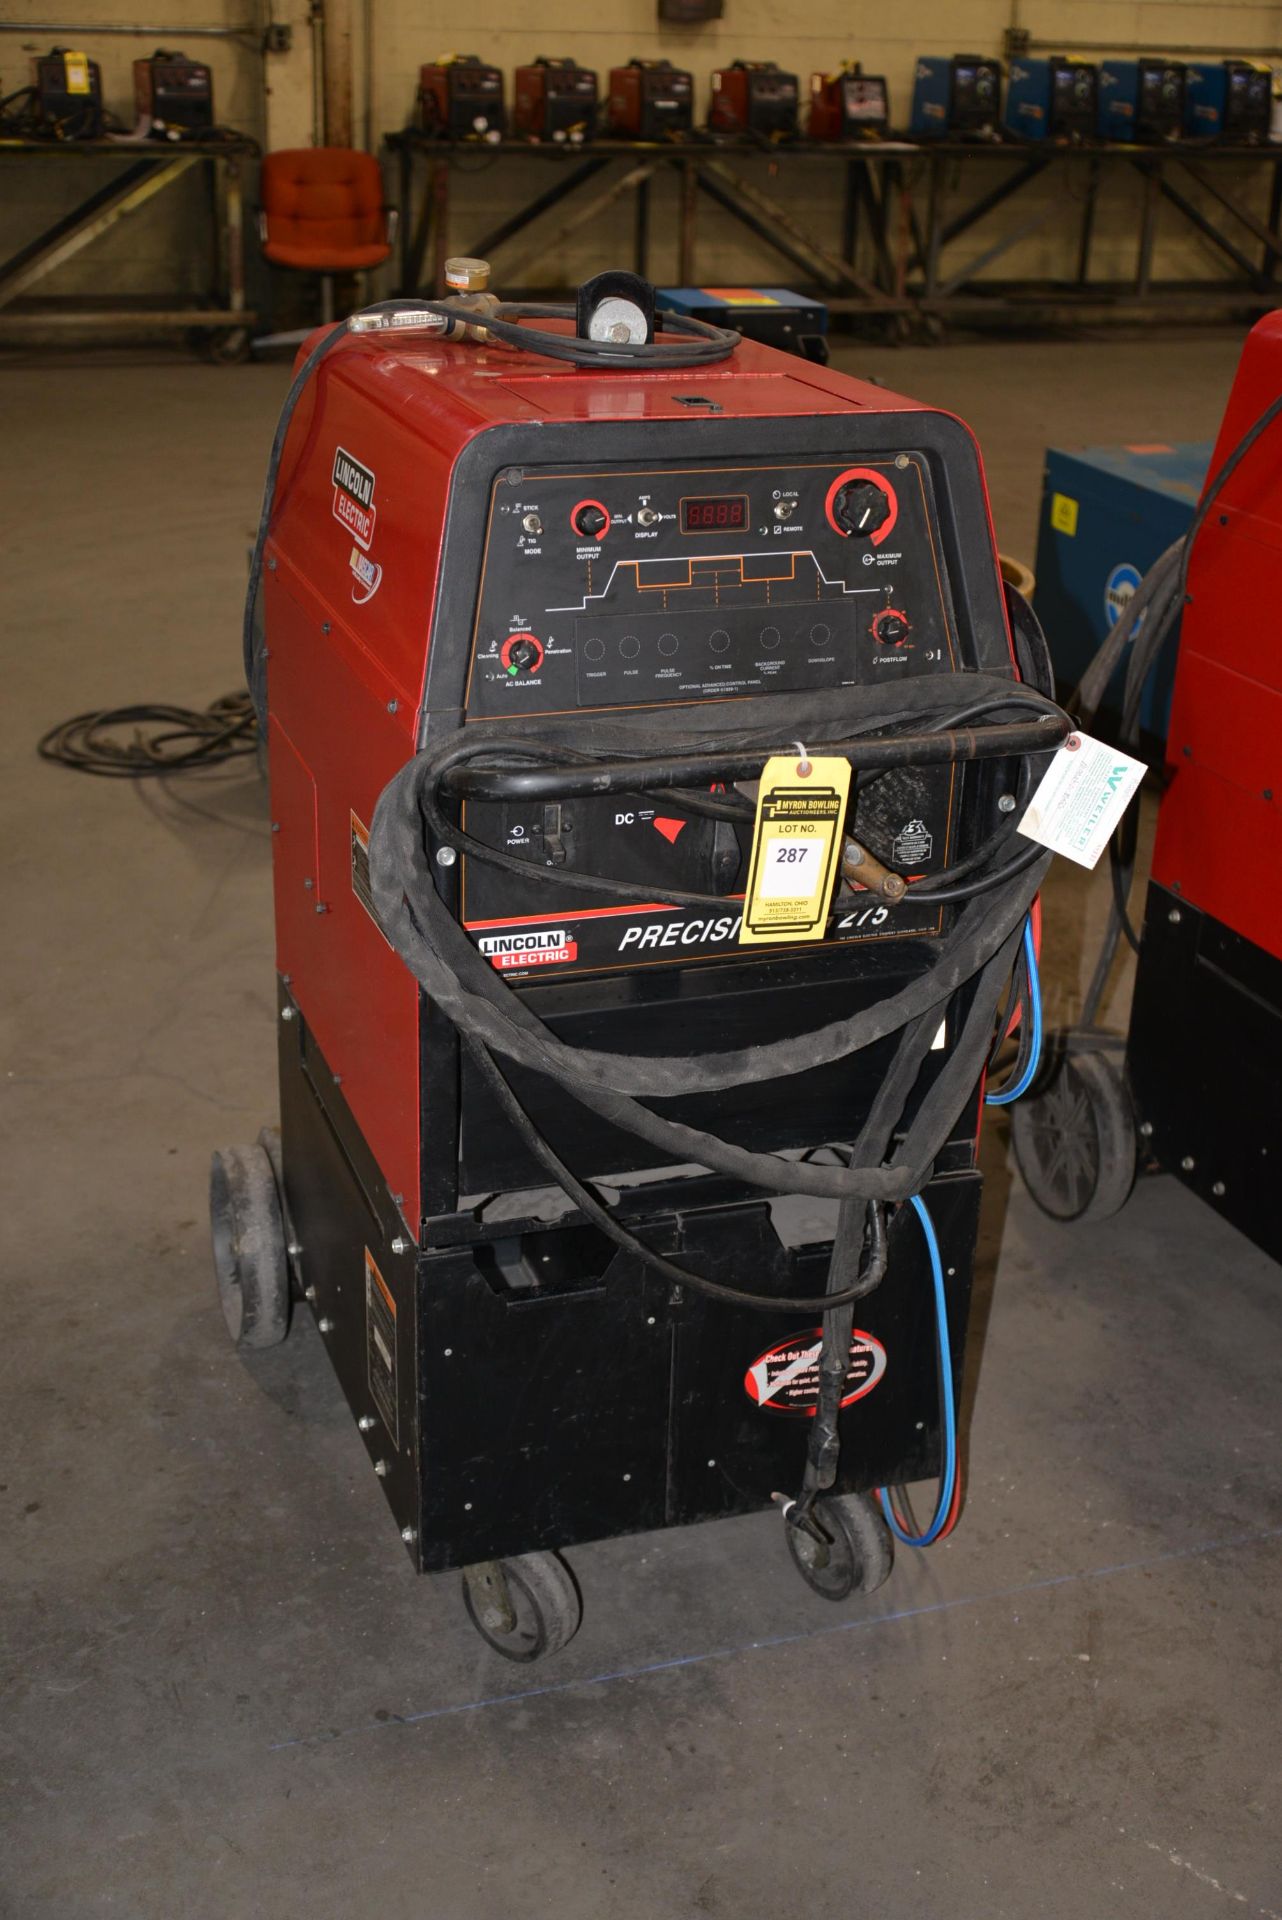 LINCOLN ELECTRIC PRECISION TIG 275 WELDER; SQUARE WAVE POWER SOURCE WITH MICRO START TECHNOLOGY, S/N